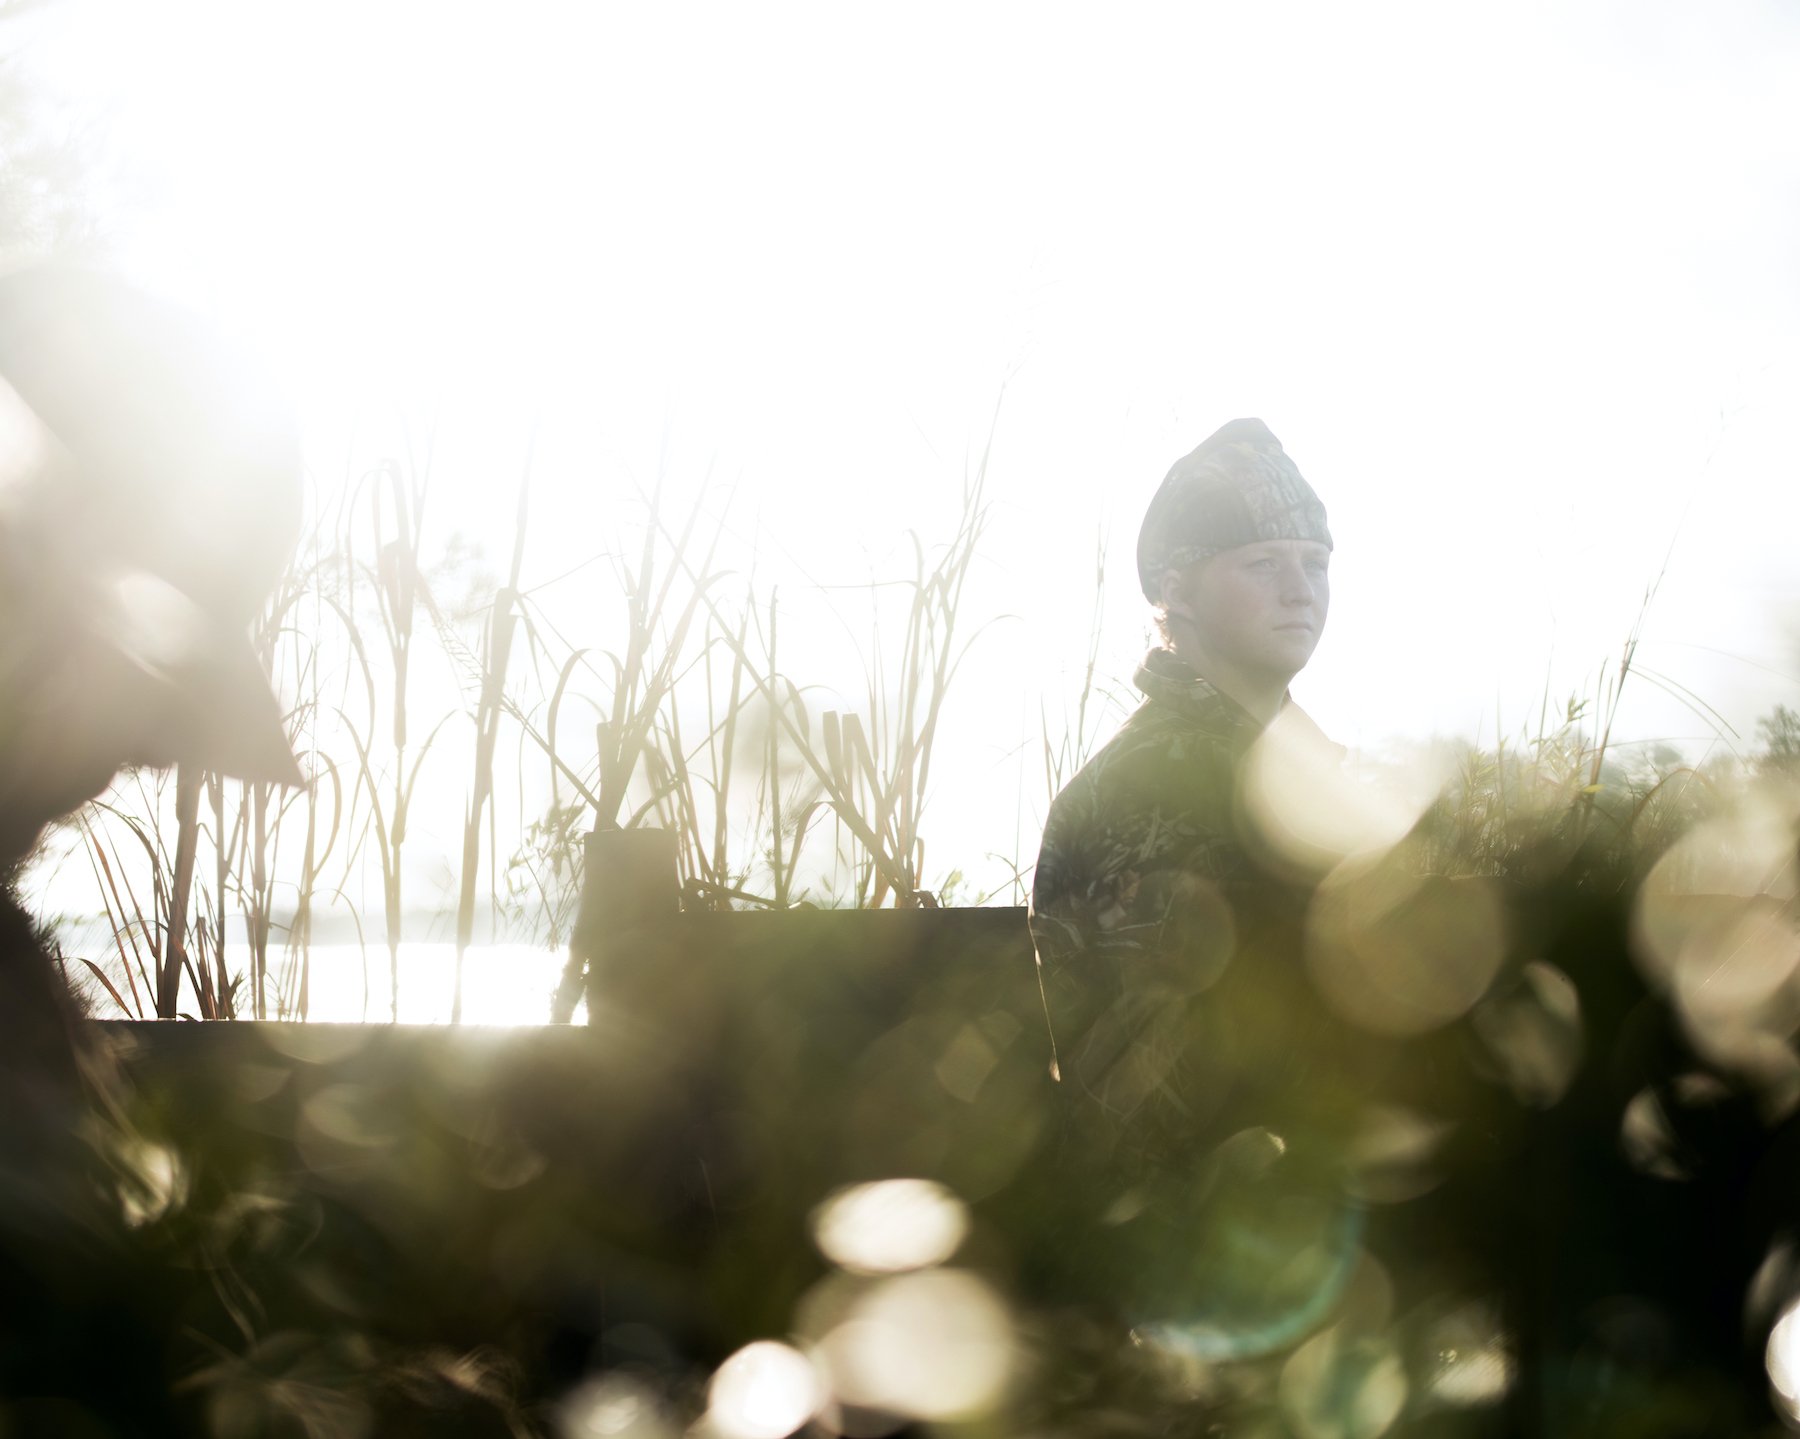  Jeremy Hudson duck hunts in Pamlico County, North Carolina. © Andrea Bruce/Down in the County 